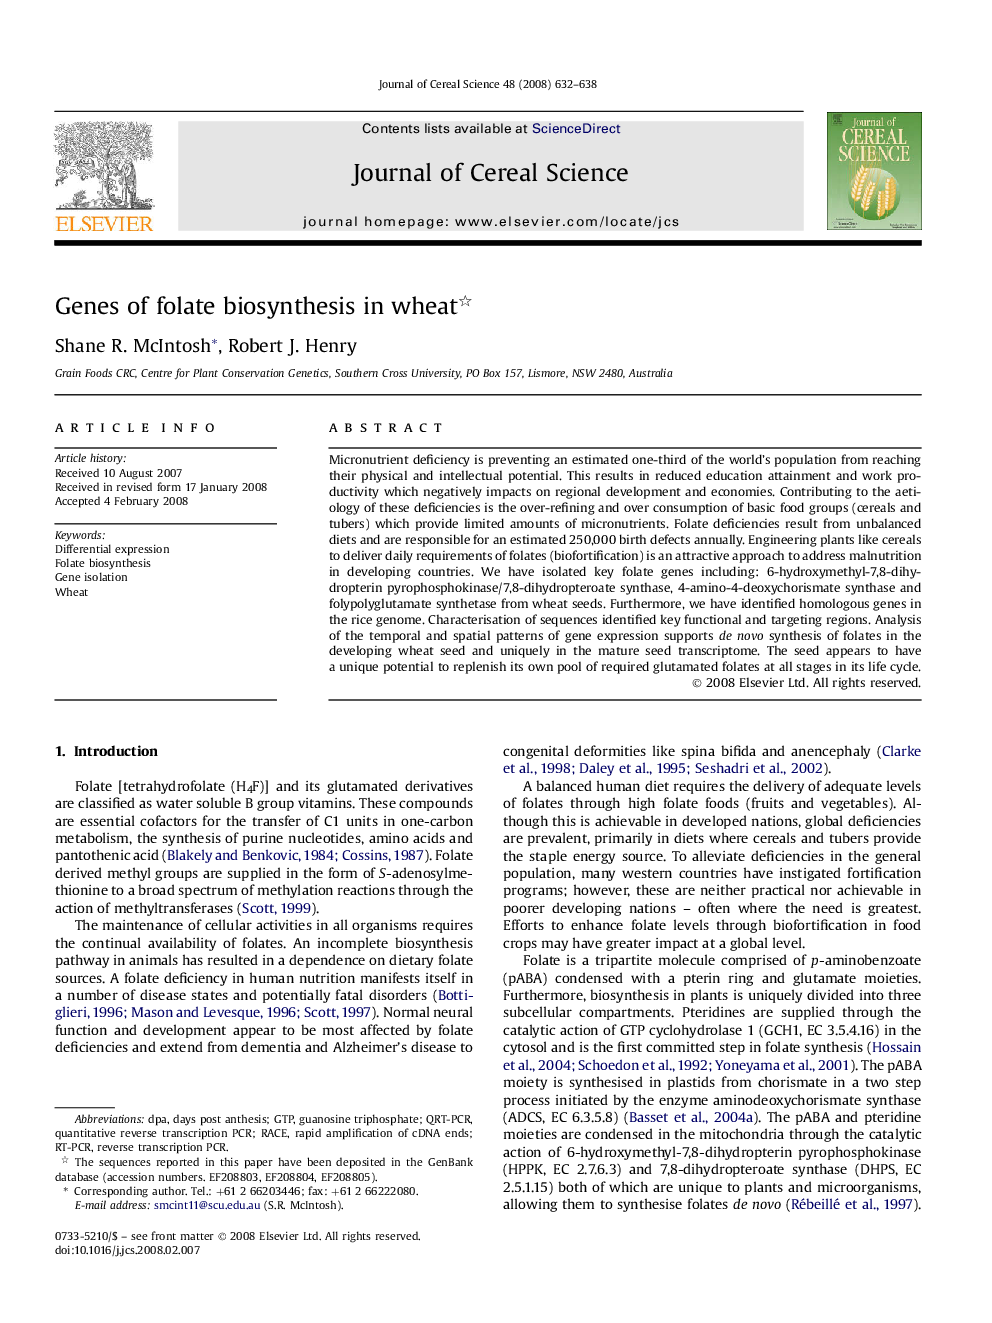 Genes of folate biosynthesis in wheat 